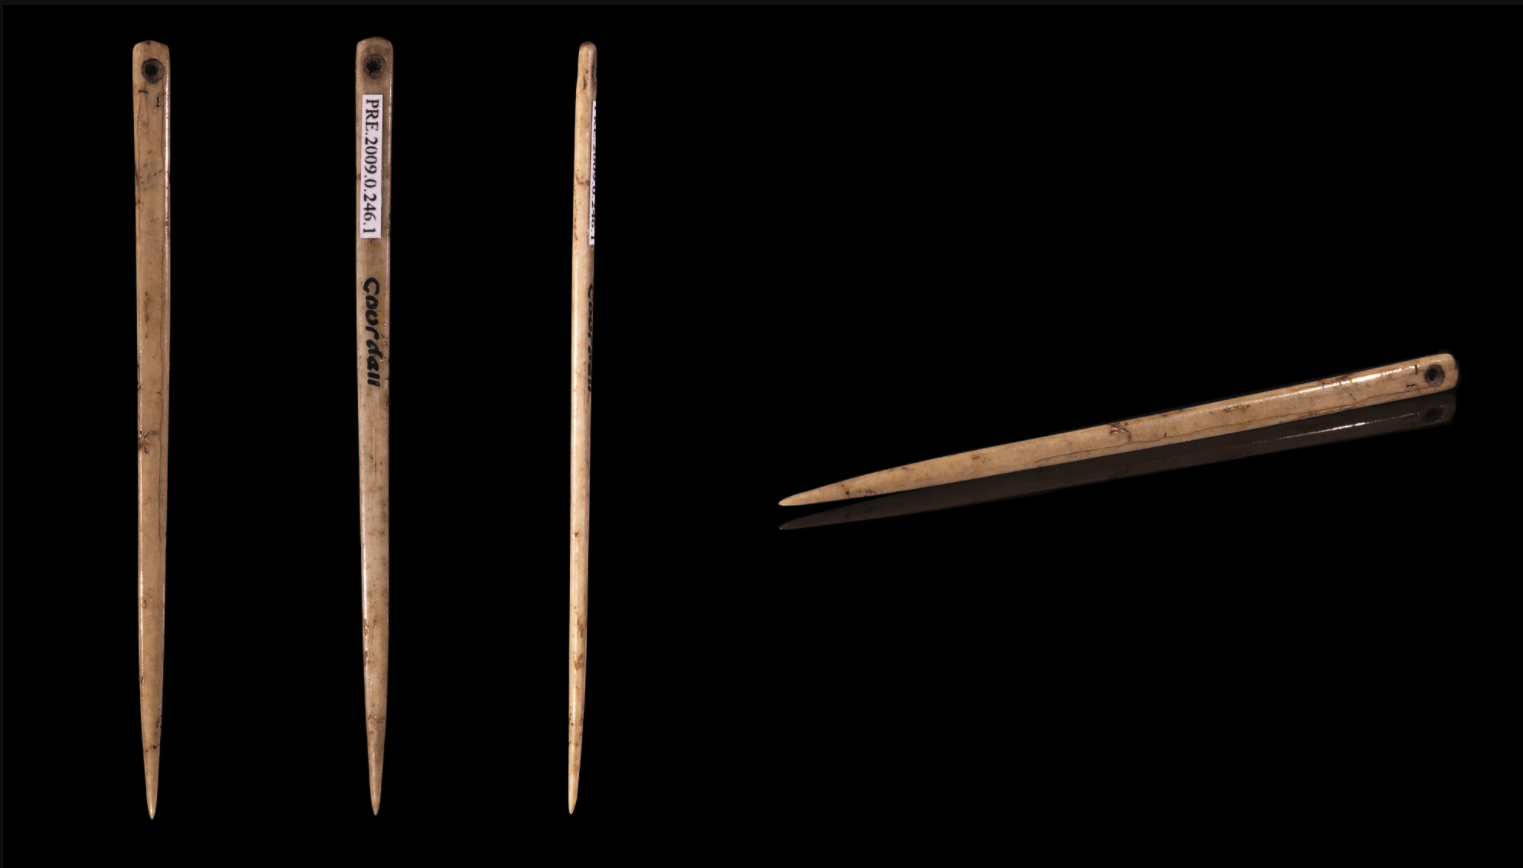 In August 2020 I was unable locate a photograph of the bone point resembling a sewing needle found in Siduku Cave. This photograph shows several views of a single flat bone sewing needle from "Elephant Cave," Gourdan–Polignan, Haute-Garonne, classified by Henri Filhol as Magdalenian Upper Paleolithic (between 17,000 and 10,000 BCE) Size : 59x3x2 mm. Muséum de Toulouse.